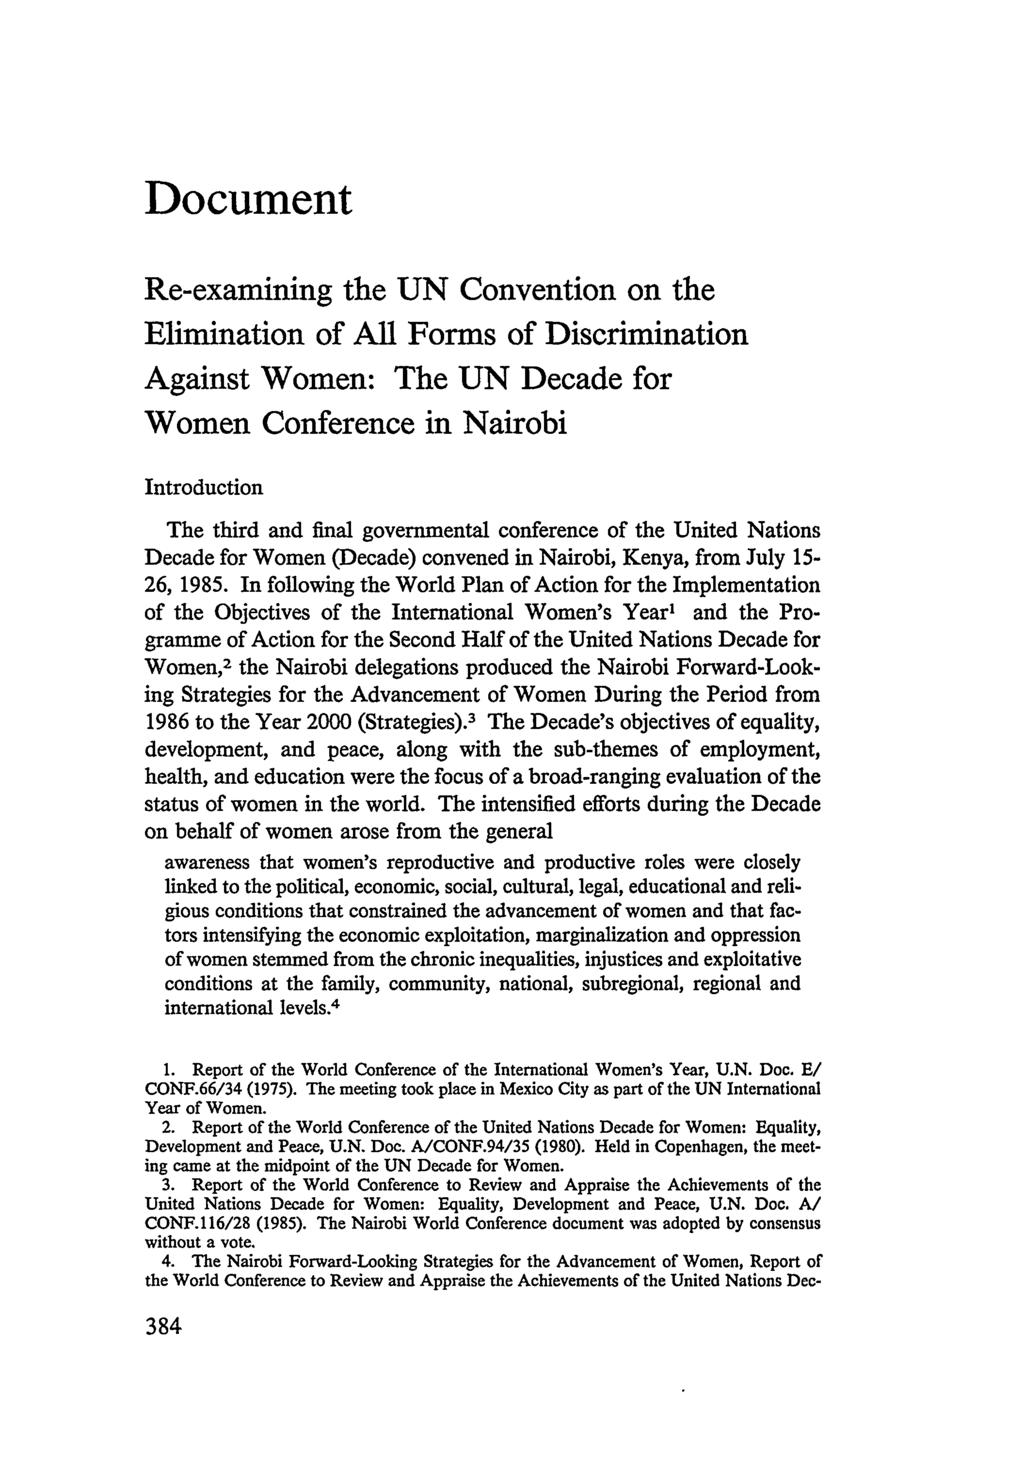 Document Re-examining the UN Convention on the Elimination of All Forms of Discrimination Against Women: The UN Decade for Women Conference in Nairobi Introduction The third and final governmental